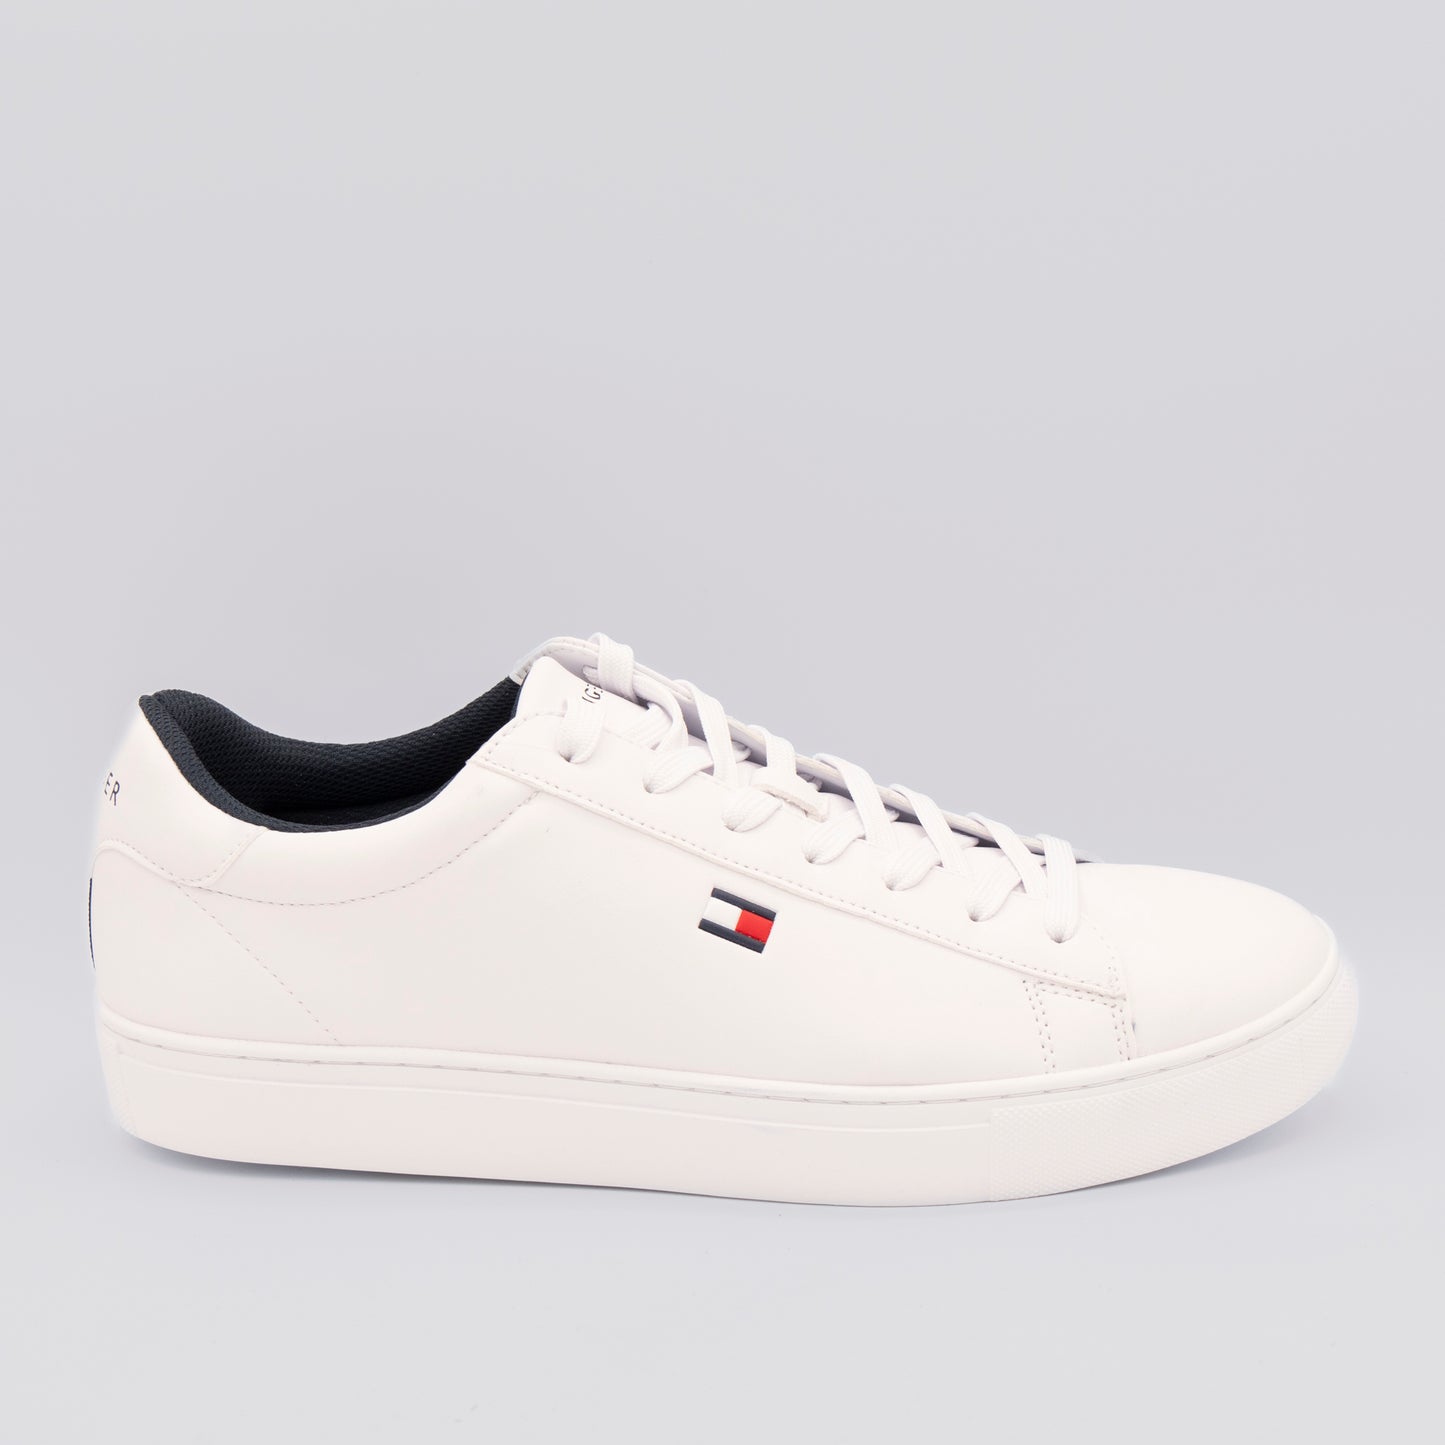 Tommy Hilfiger - Men's Brecon Cup Sole Sneakers - White